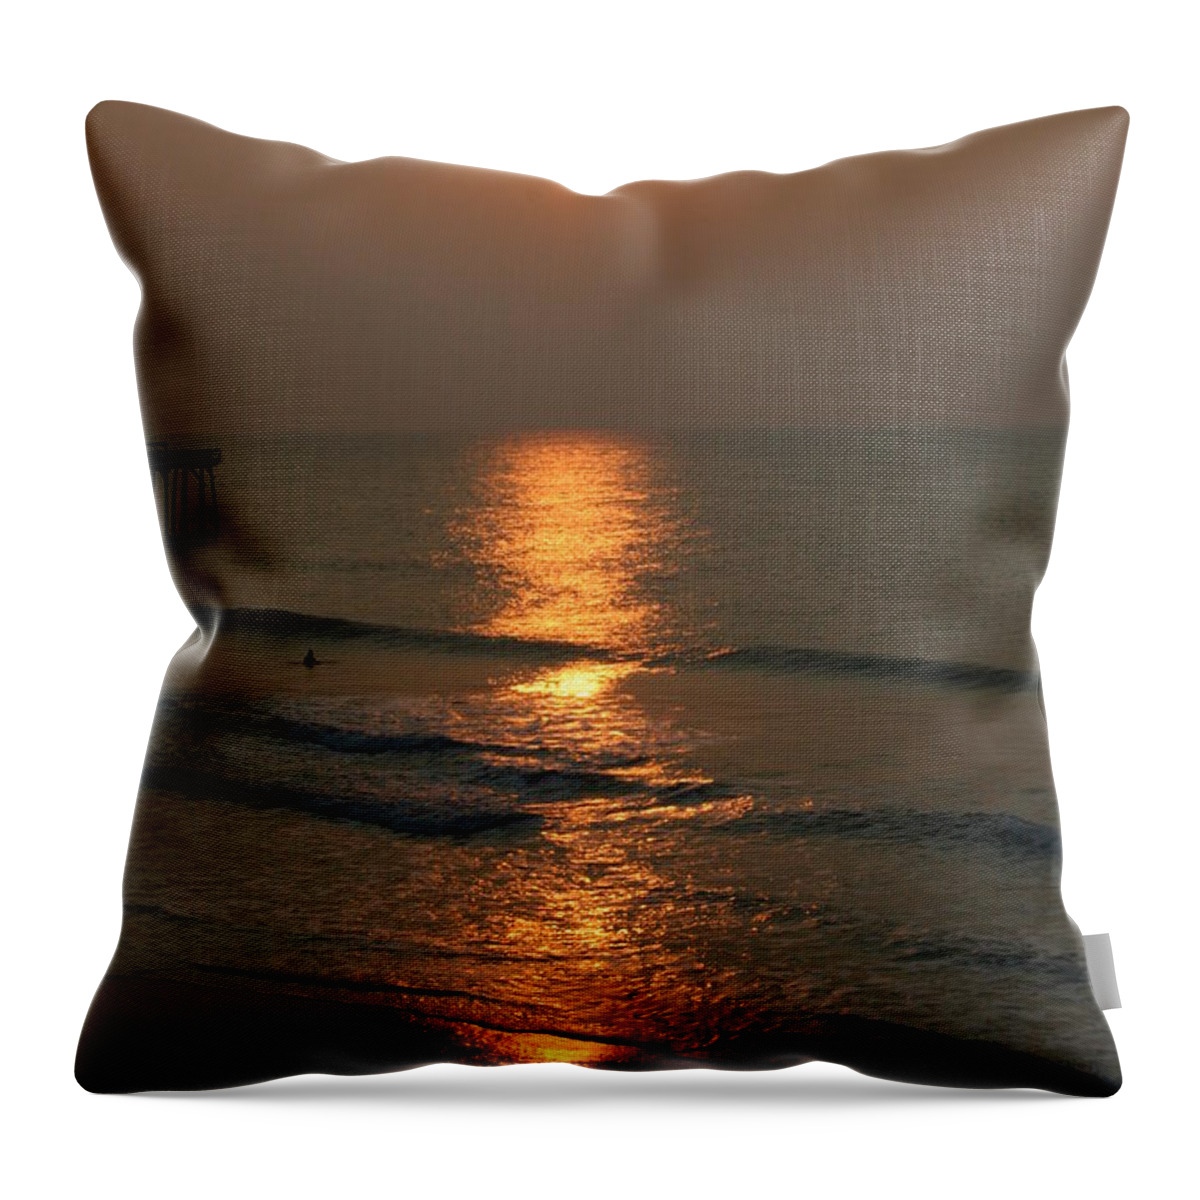 Sunset Throw Pillow featuring the photograph Sunshine by Julie Lueders 